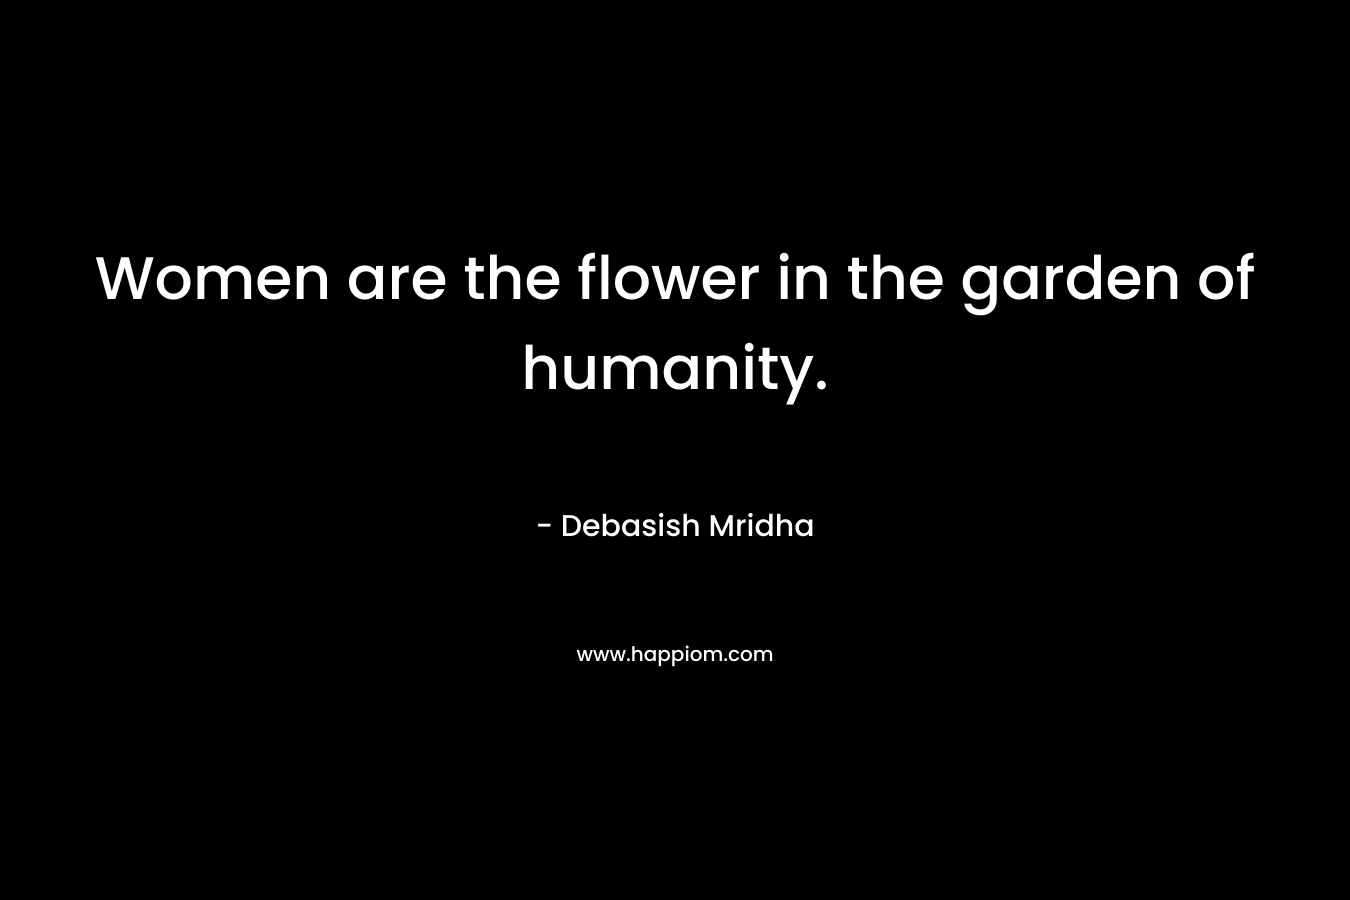 Women are the flower in the garden of humanity.